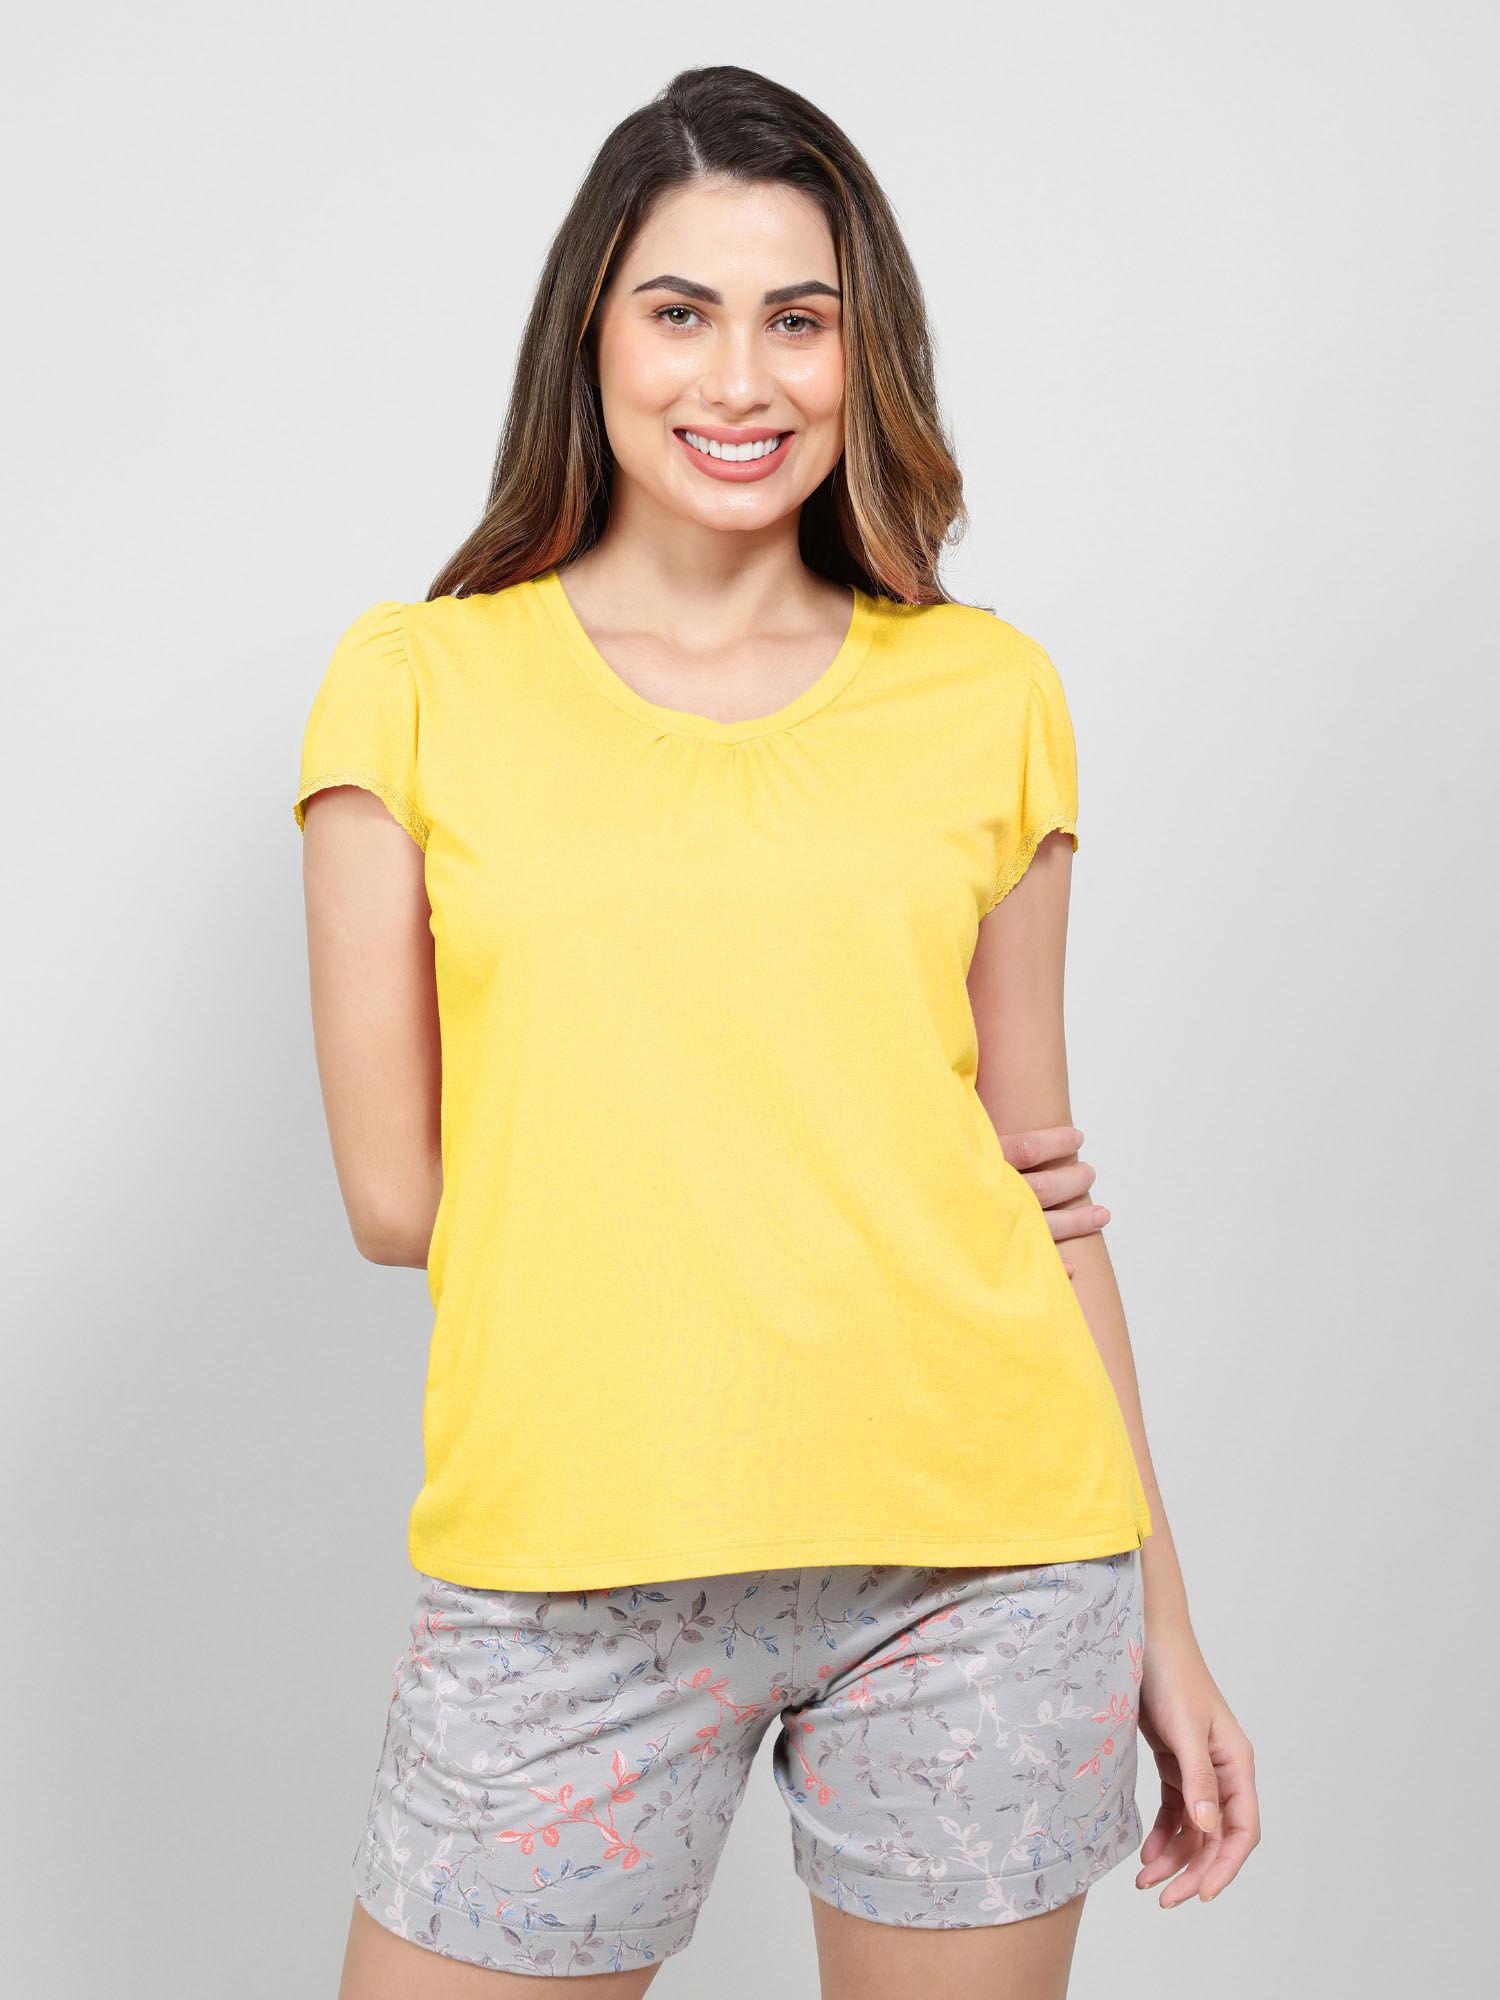 rx12-womens-micro-modal-cotton-relaxed-fit-solid-round-neck-t-shirt---yolk-yellow